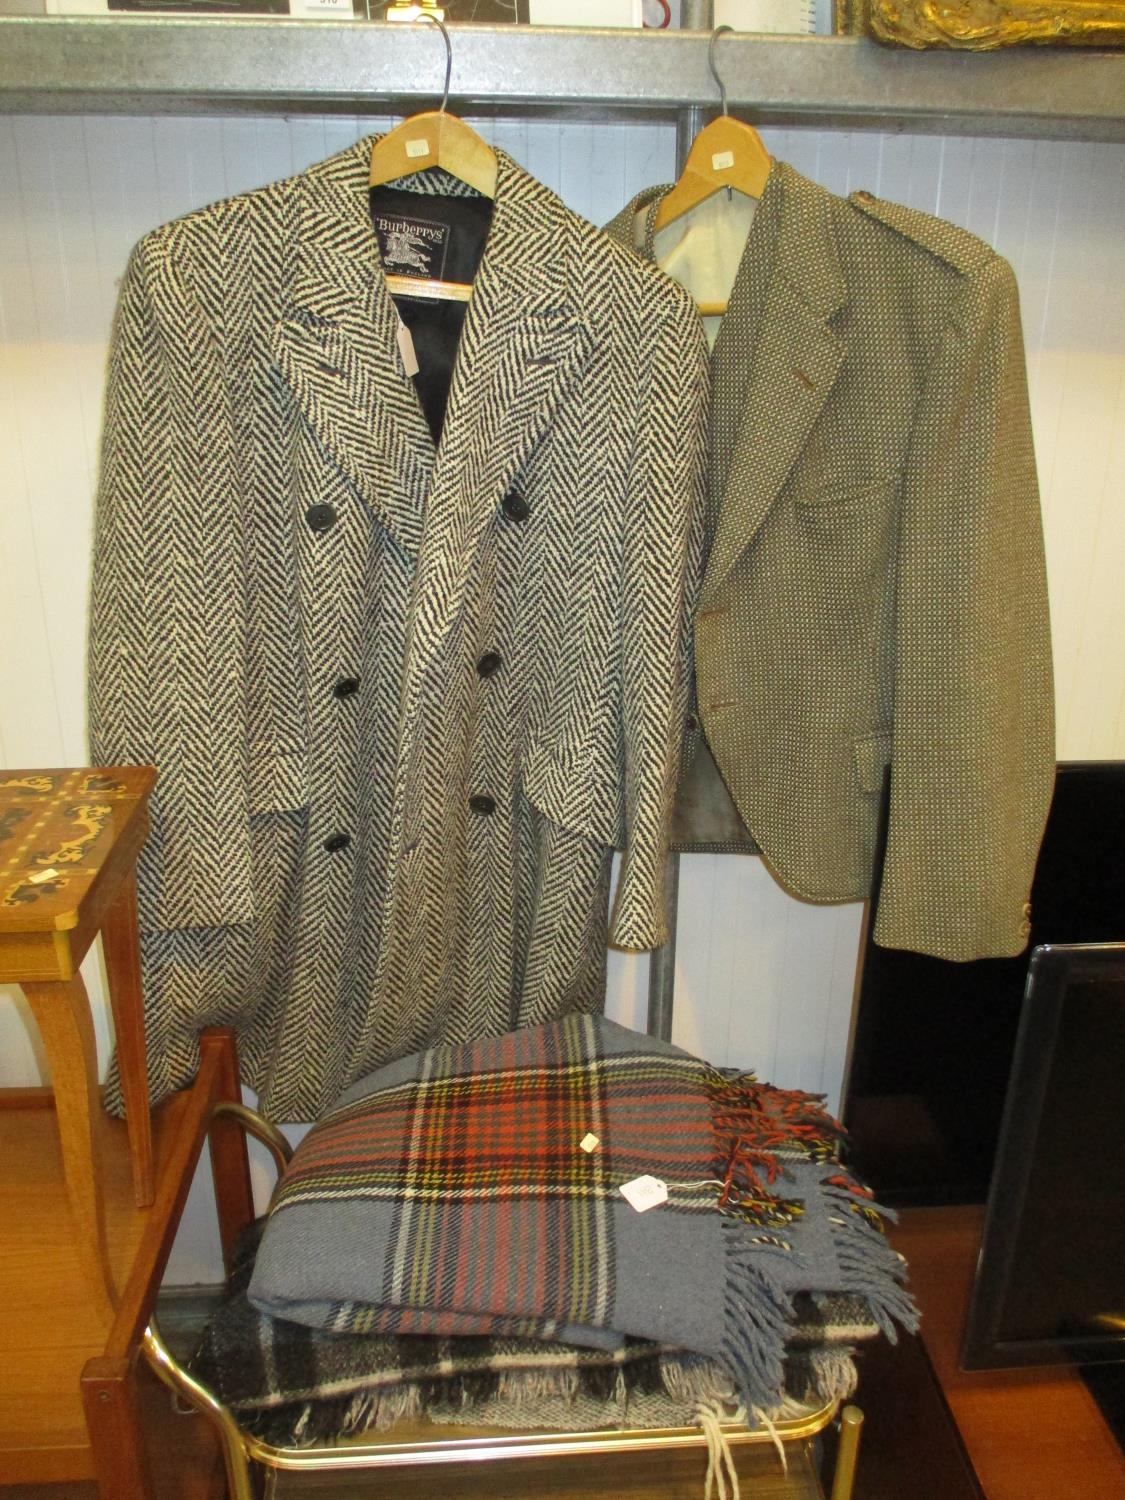 Burberrys Irish Tweed Overcoat, 40in chest, Tweed Jacket and Waistcoat, 40in chest, and 3 Travel